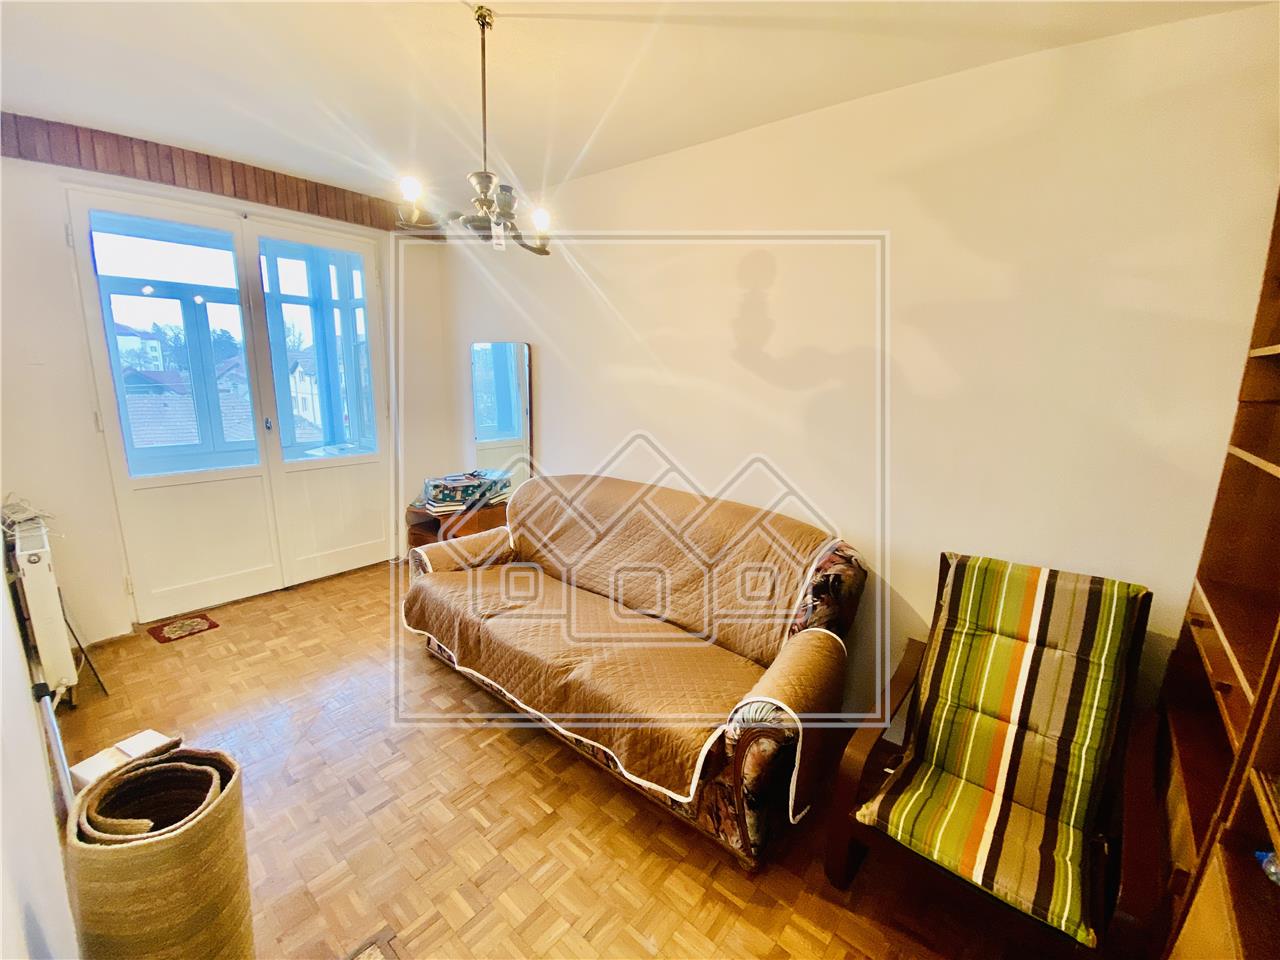 Apartment for sale in Sibiu - 3 rooms and 2 balconies - Lupeni area